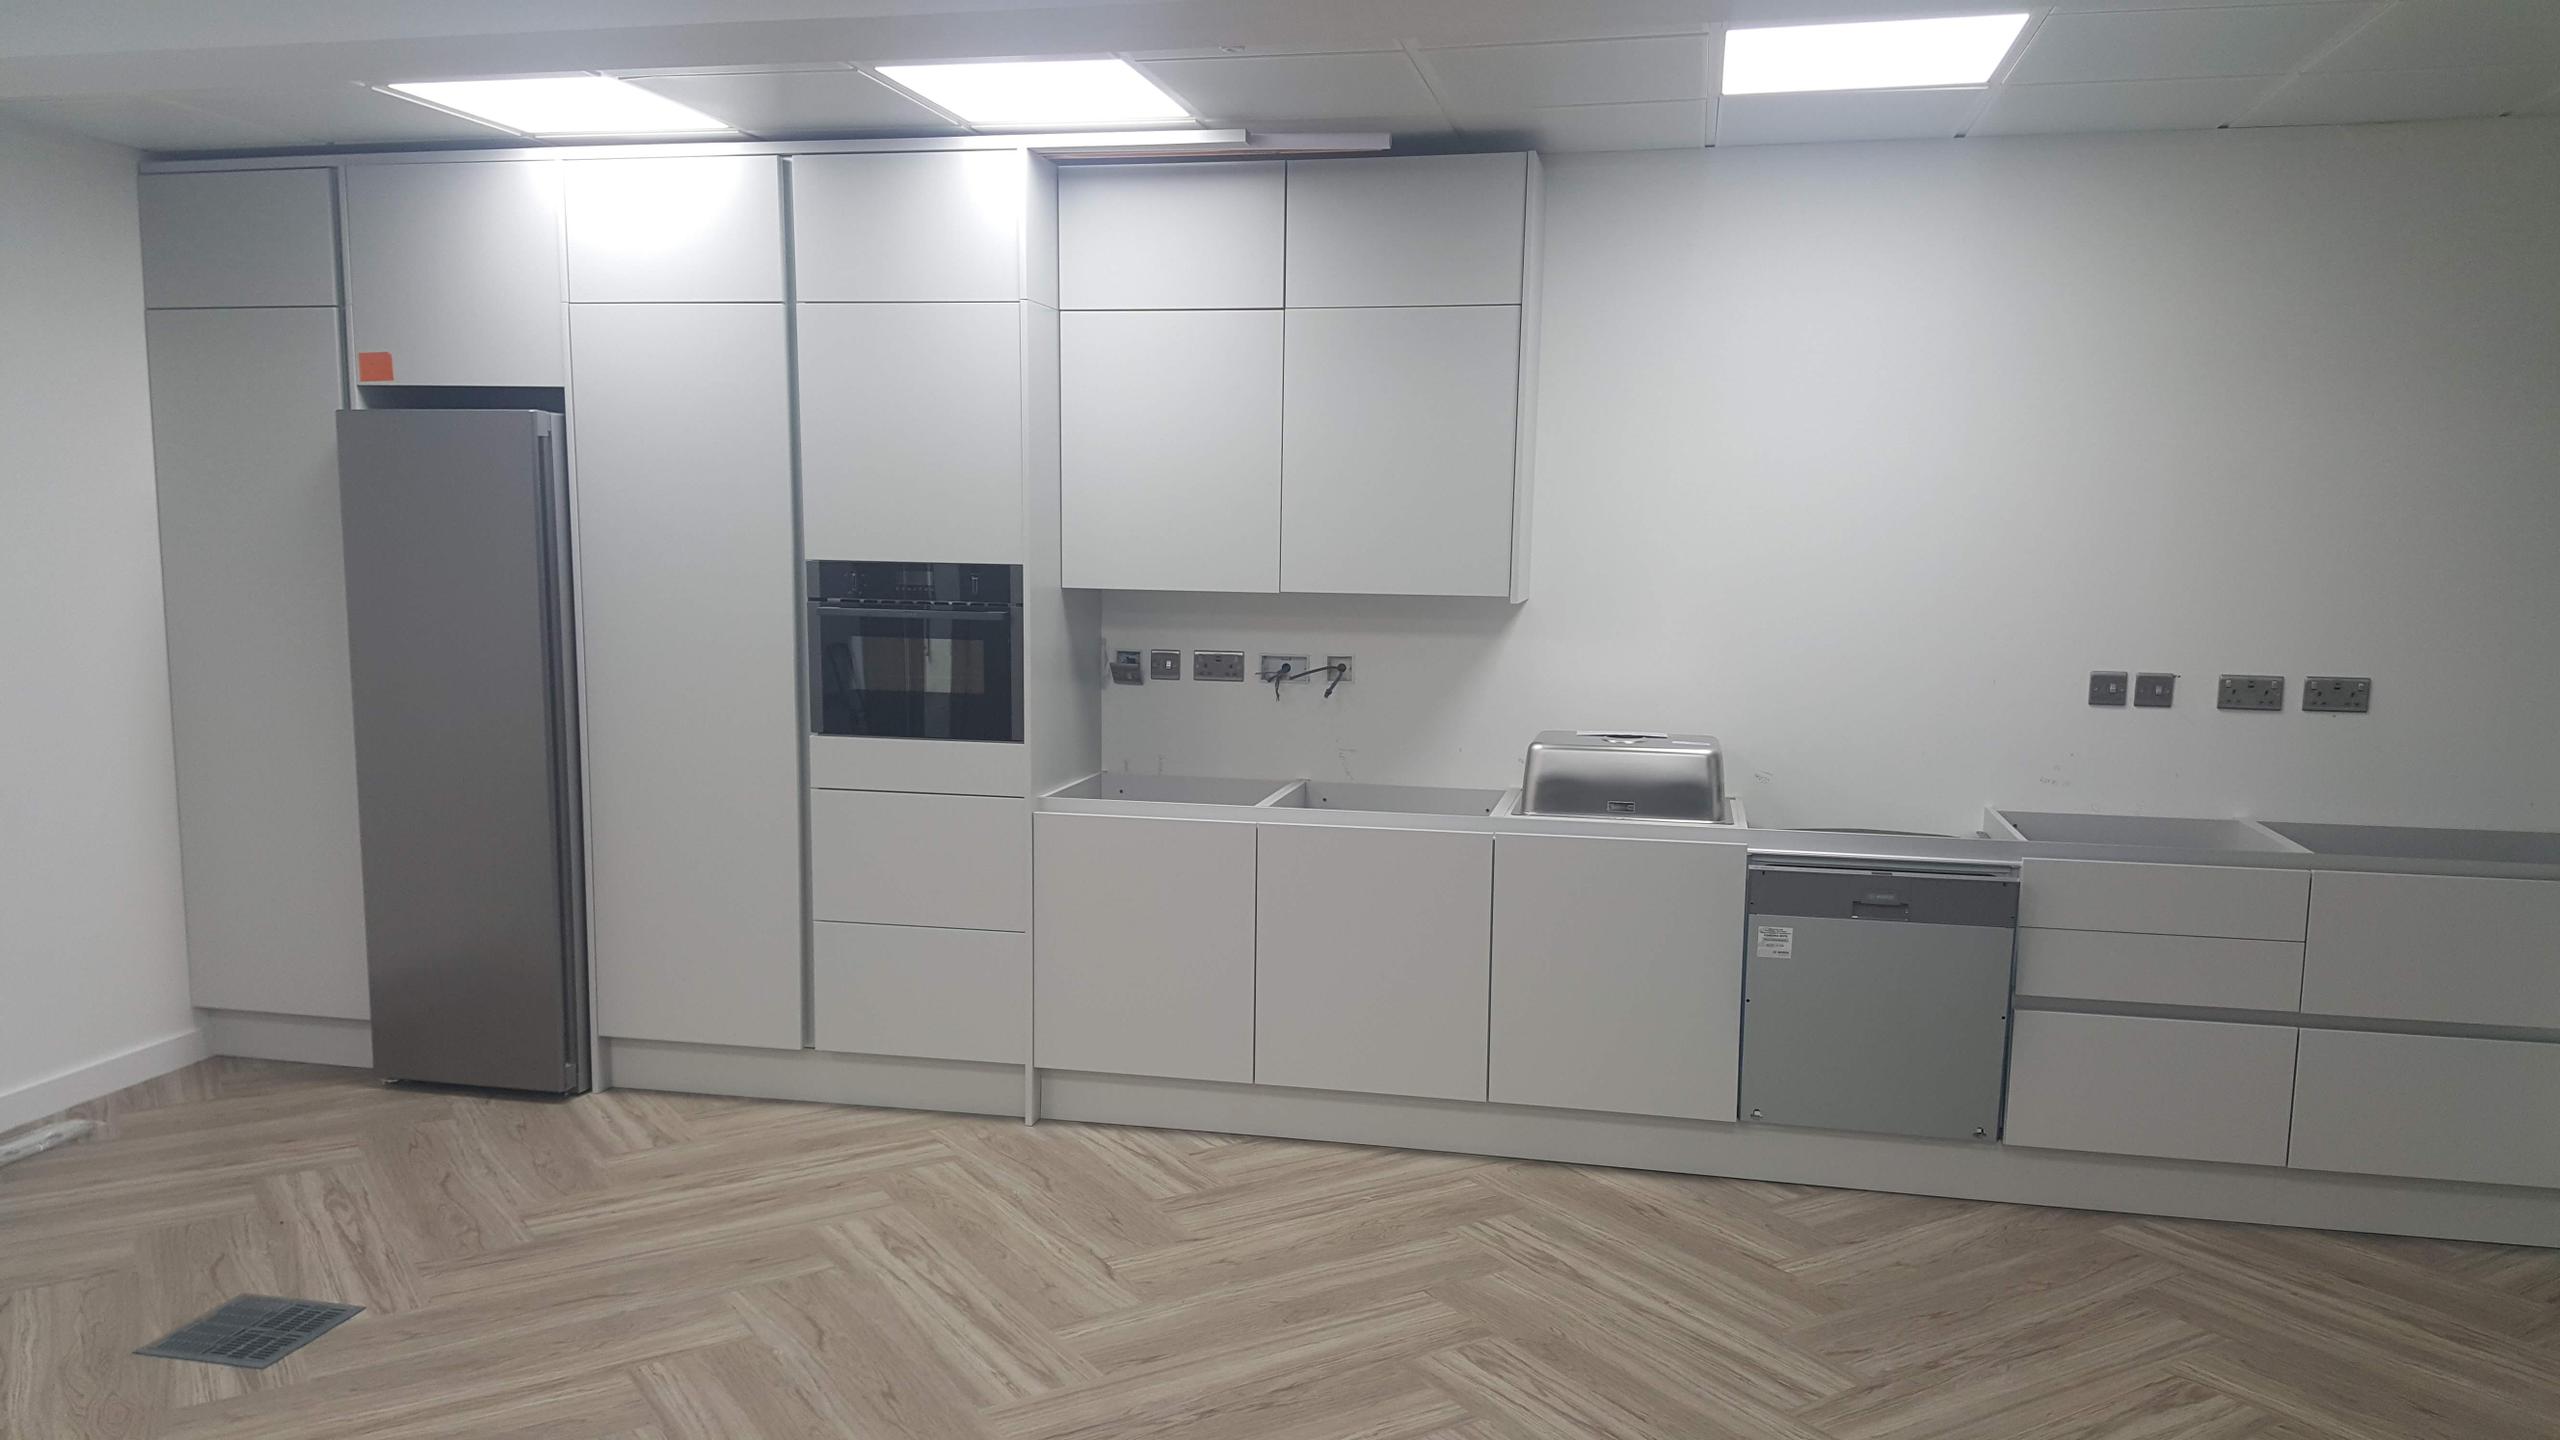 Kitchen fitout ready for the worktop